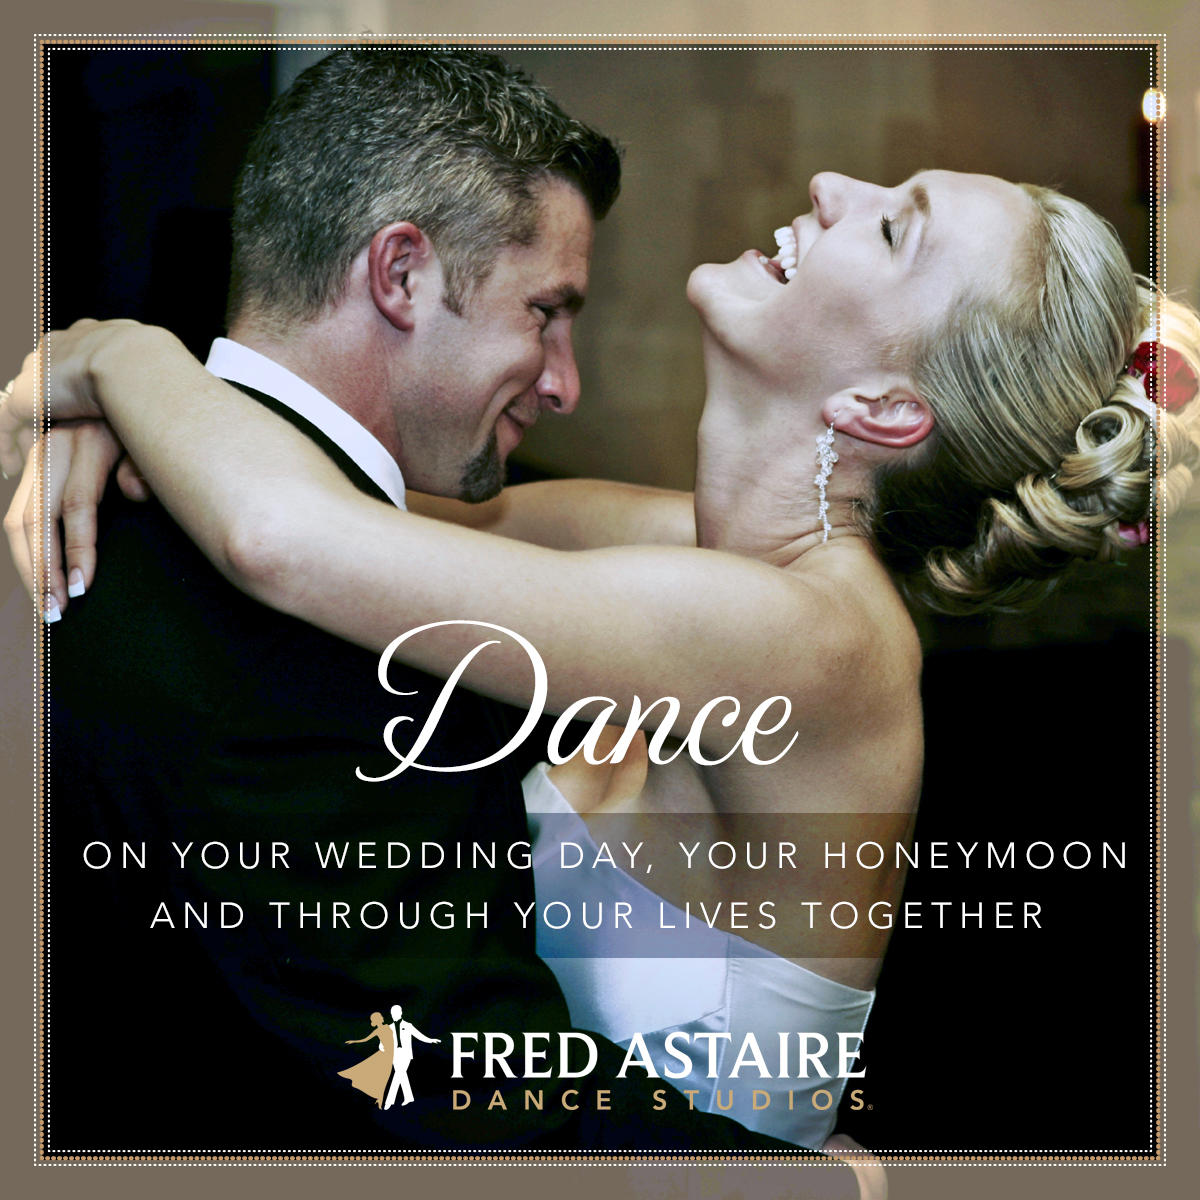 Offering first dance lessons, mother-son dance lessons, father-daughter dance lessons and wedding party choreography! Call today to get started! 401-404-5404